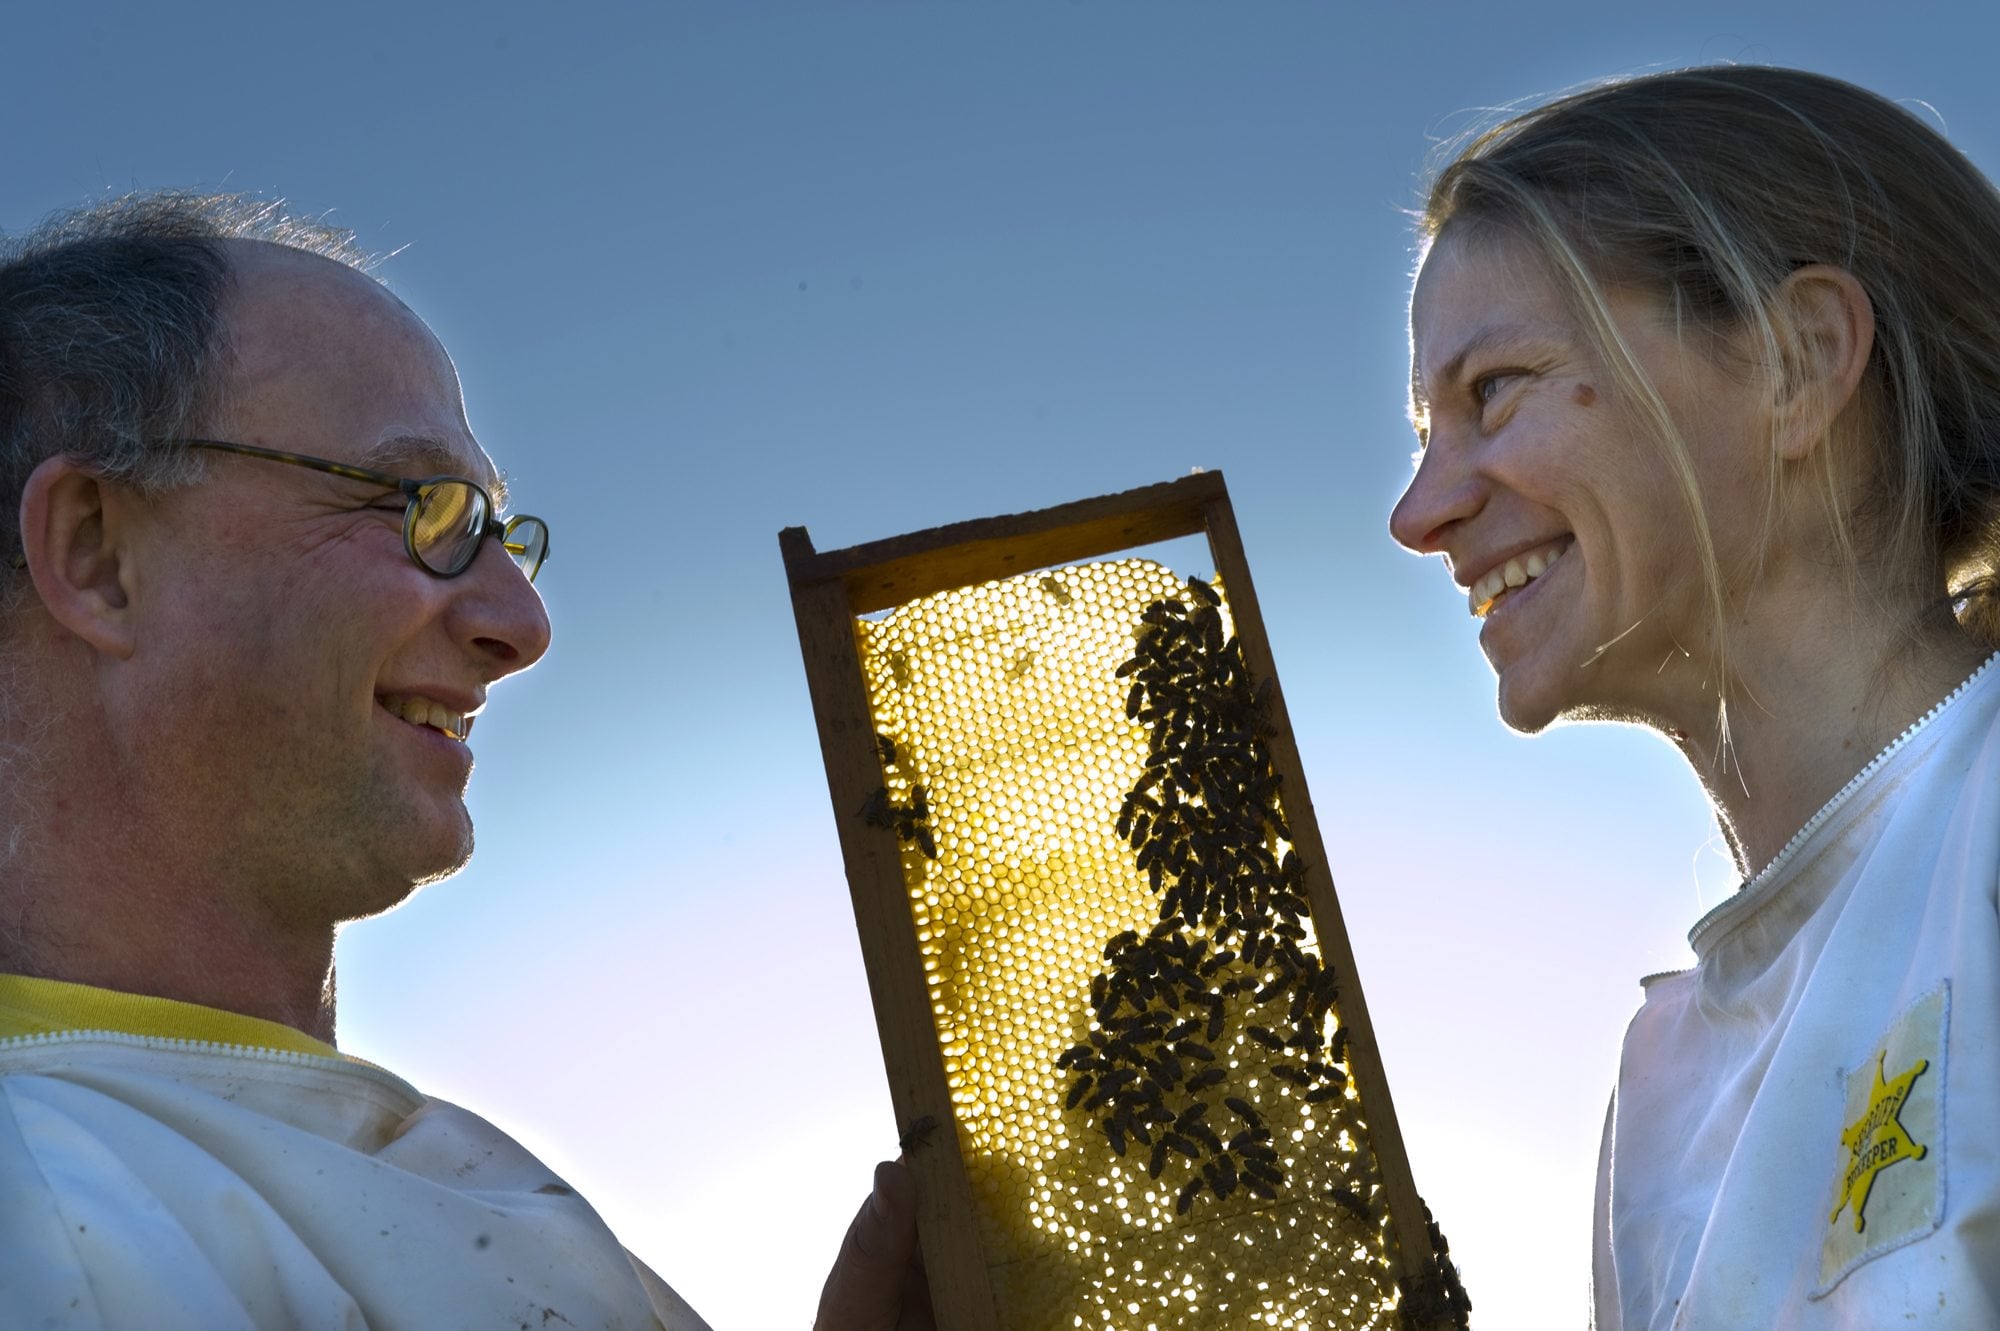 Adam Finkelstein and Kelly Rausch, of Frederick, Md., are working to defeat colony collapse disorder and other threats to honeybees.